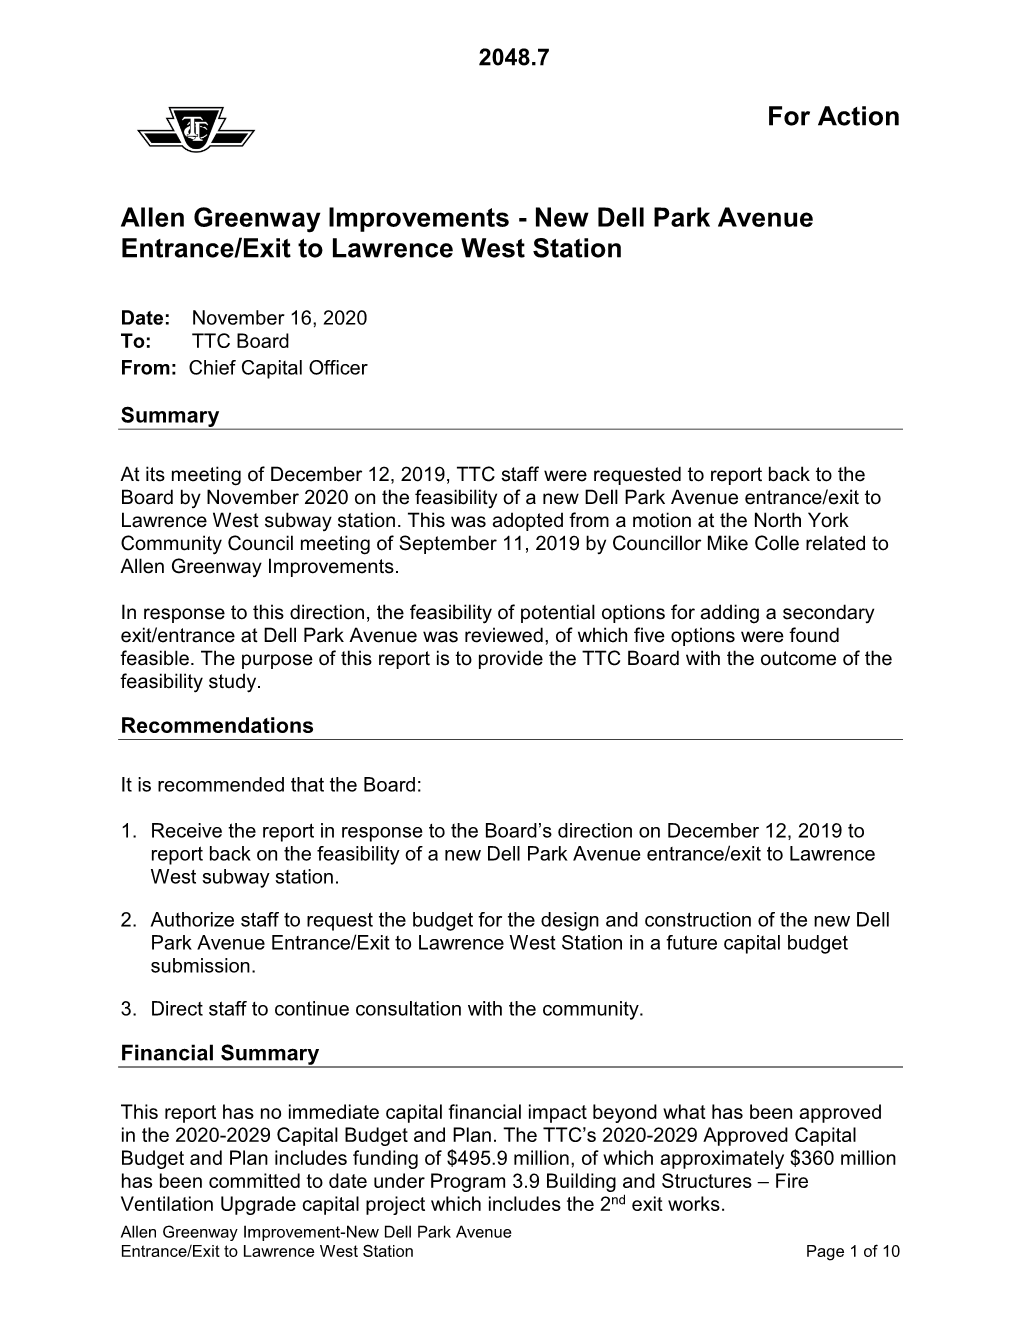 Report on Possible Designs for a Dell Park Entrance To